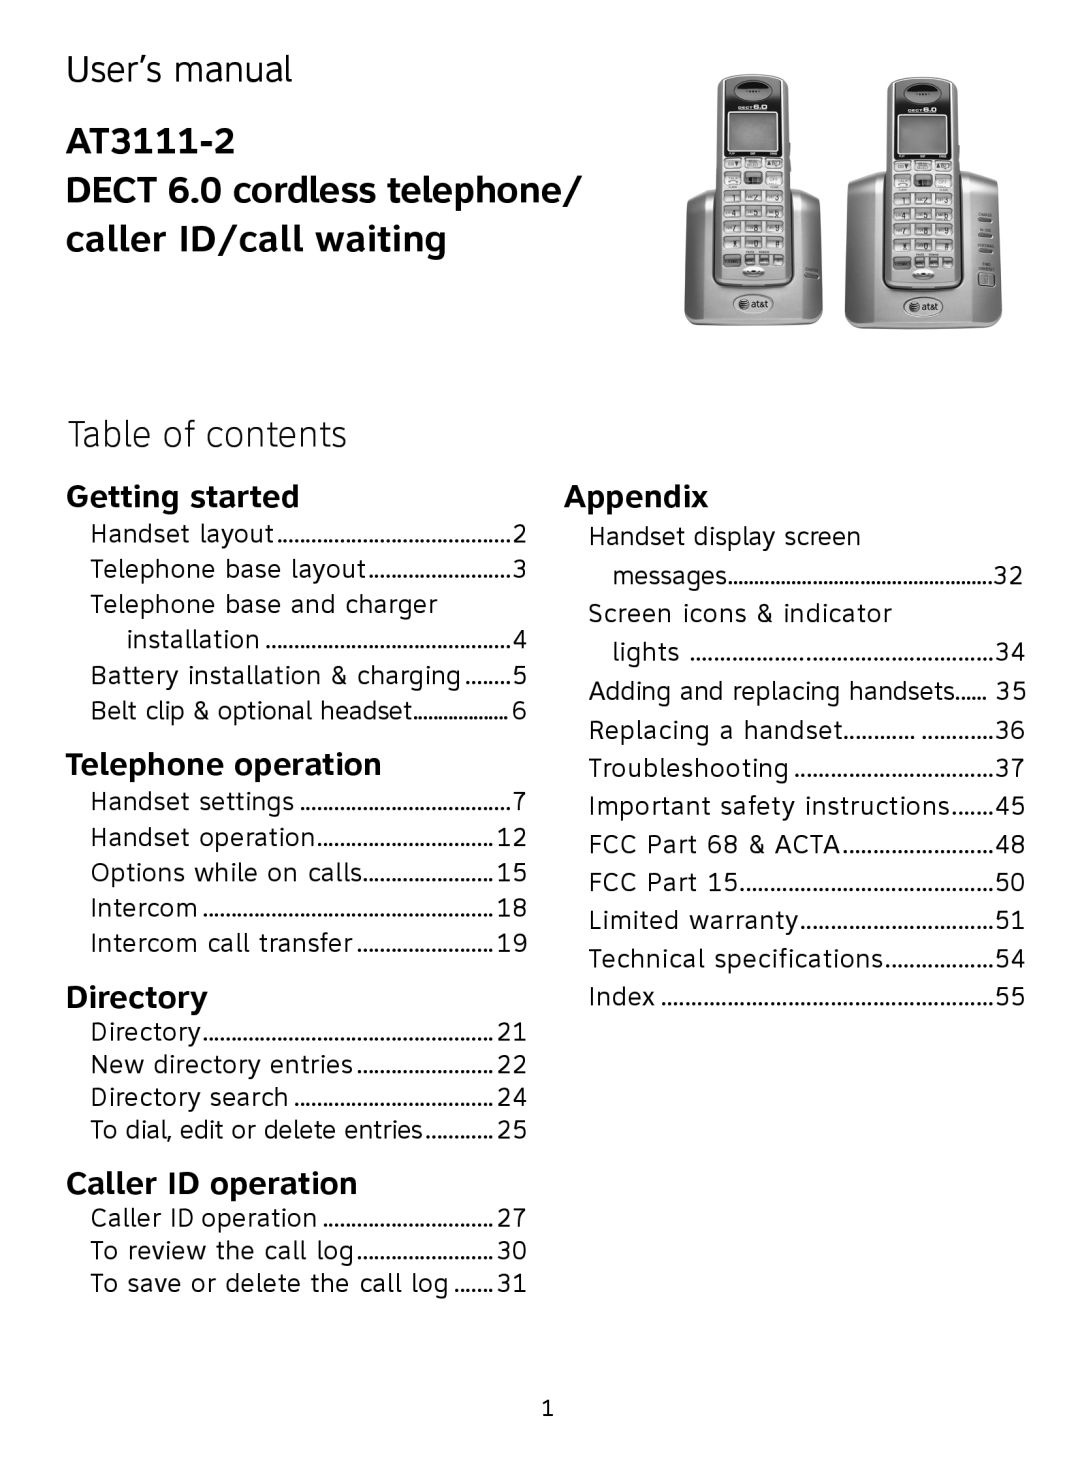 AT&T AT3111-2 User’s manual, Table of contents, Getting started, Telephone operation, Directory, Caller ID operation 